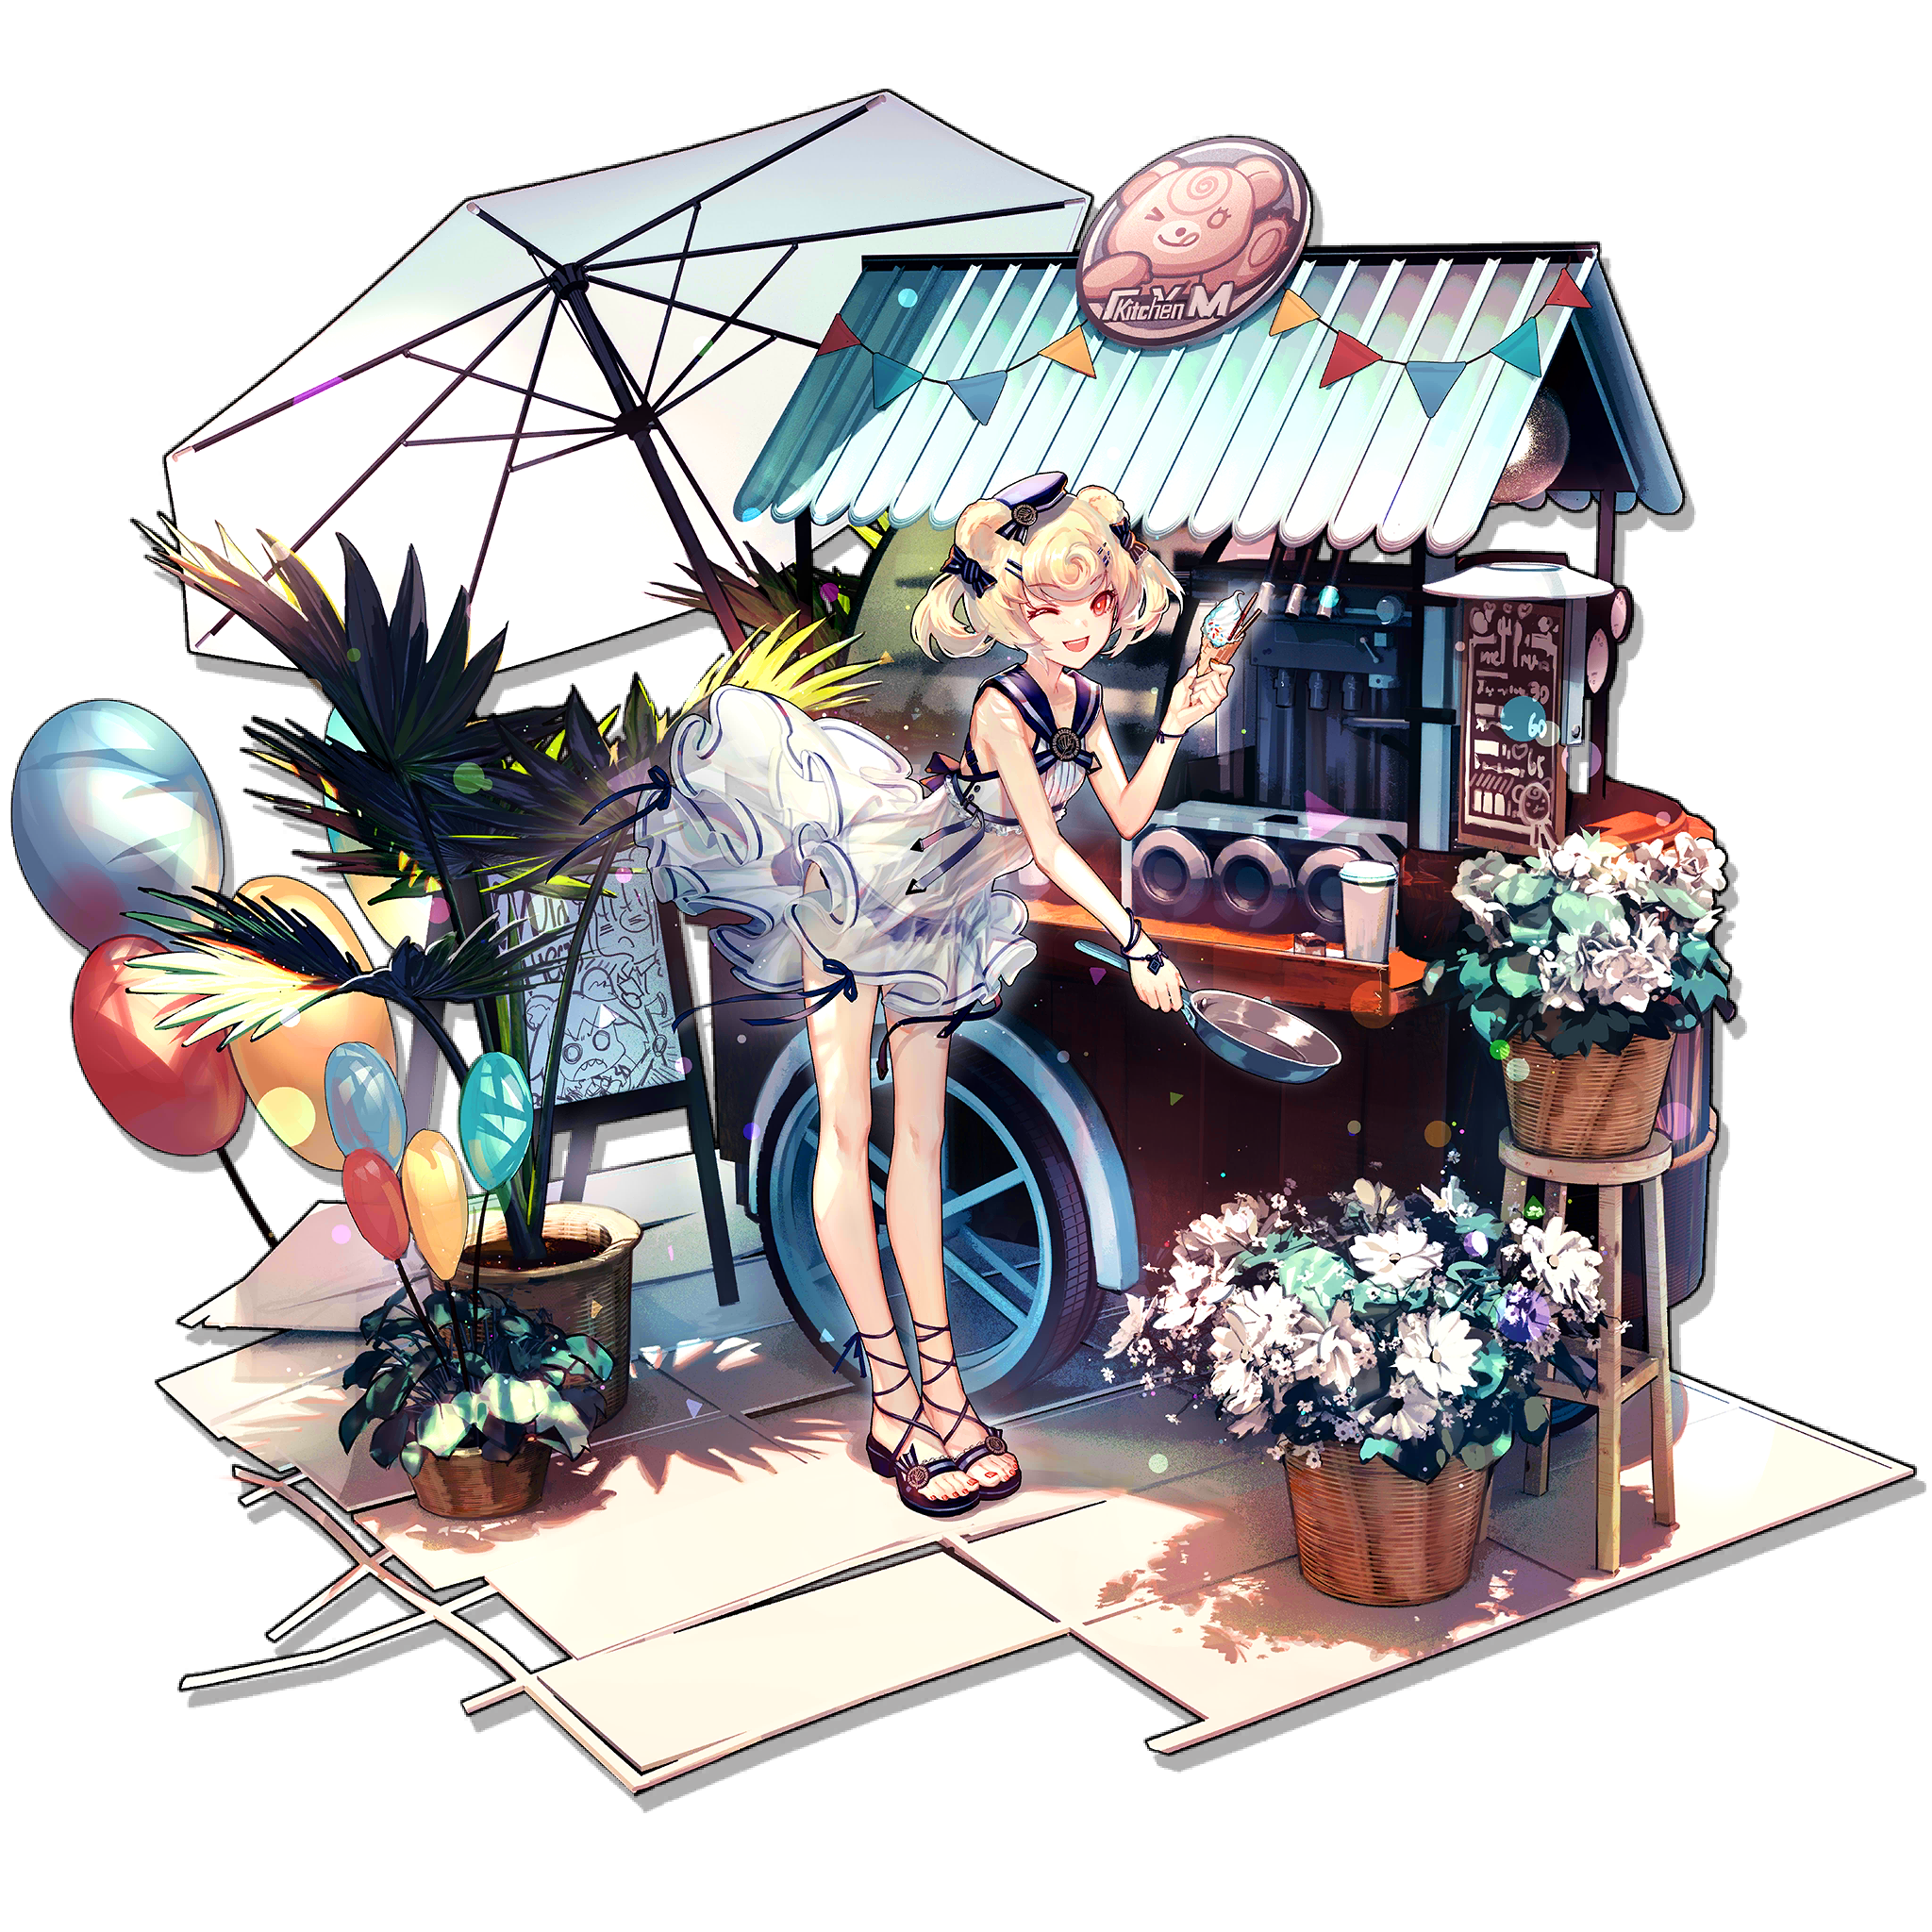 Arknights Anime Ice Cream Balloon Sunshade Plants Flowers Sailor Outfit Sandals Billboards Pan Cooki 2048x2048